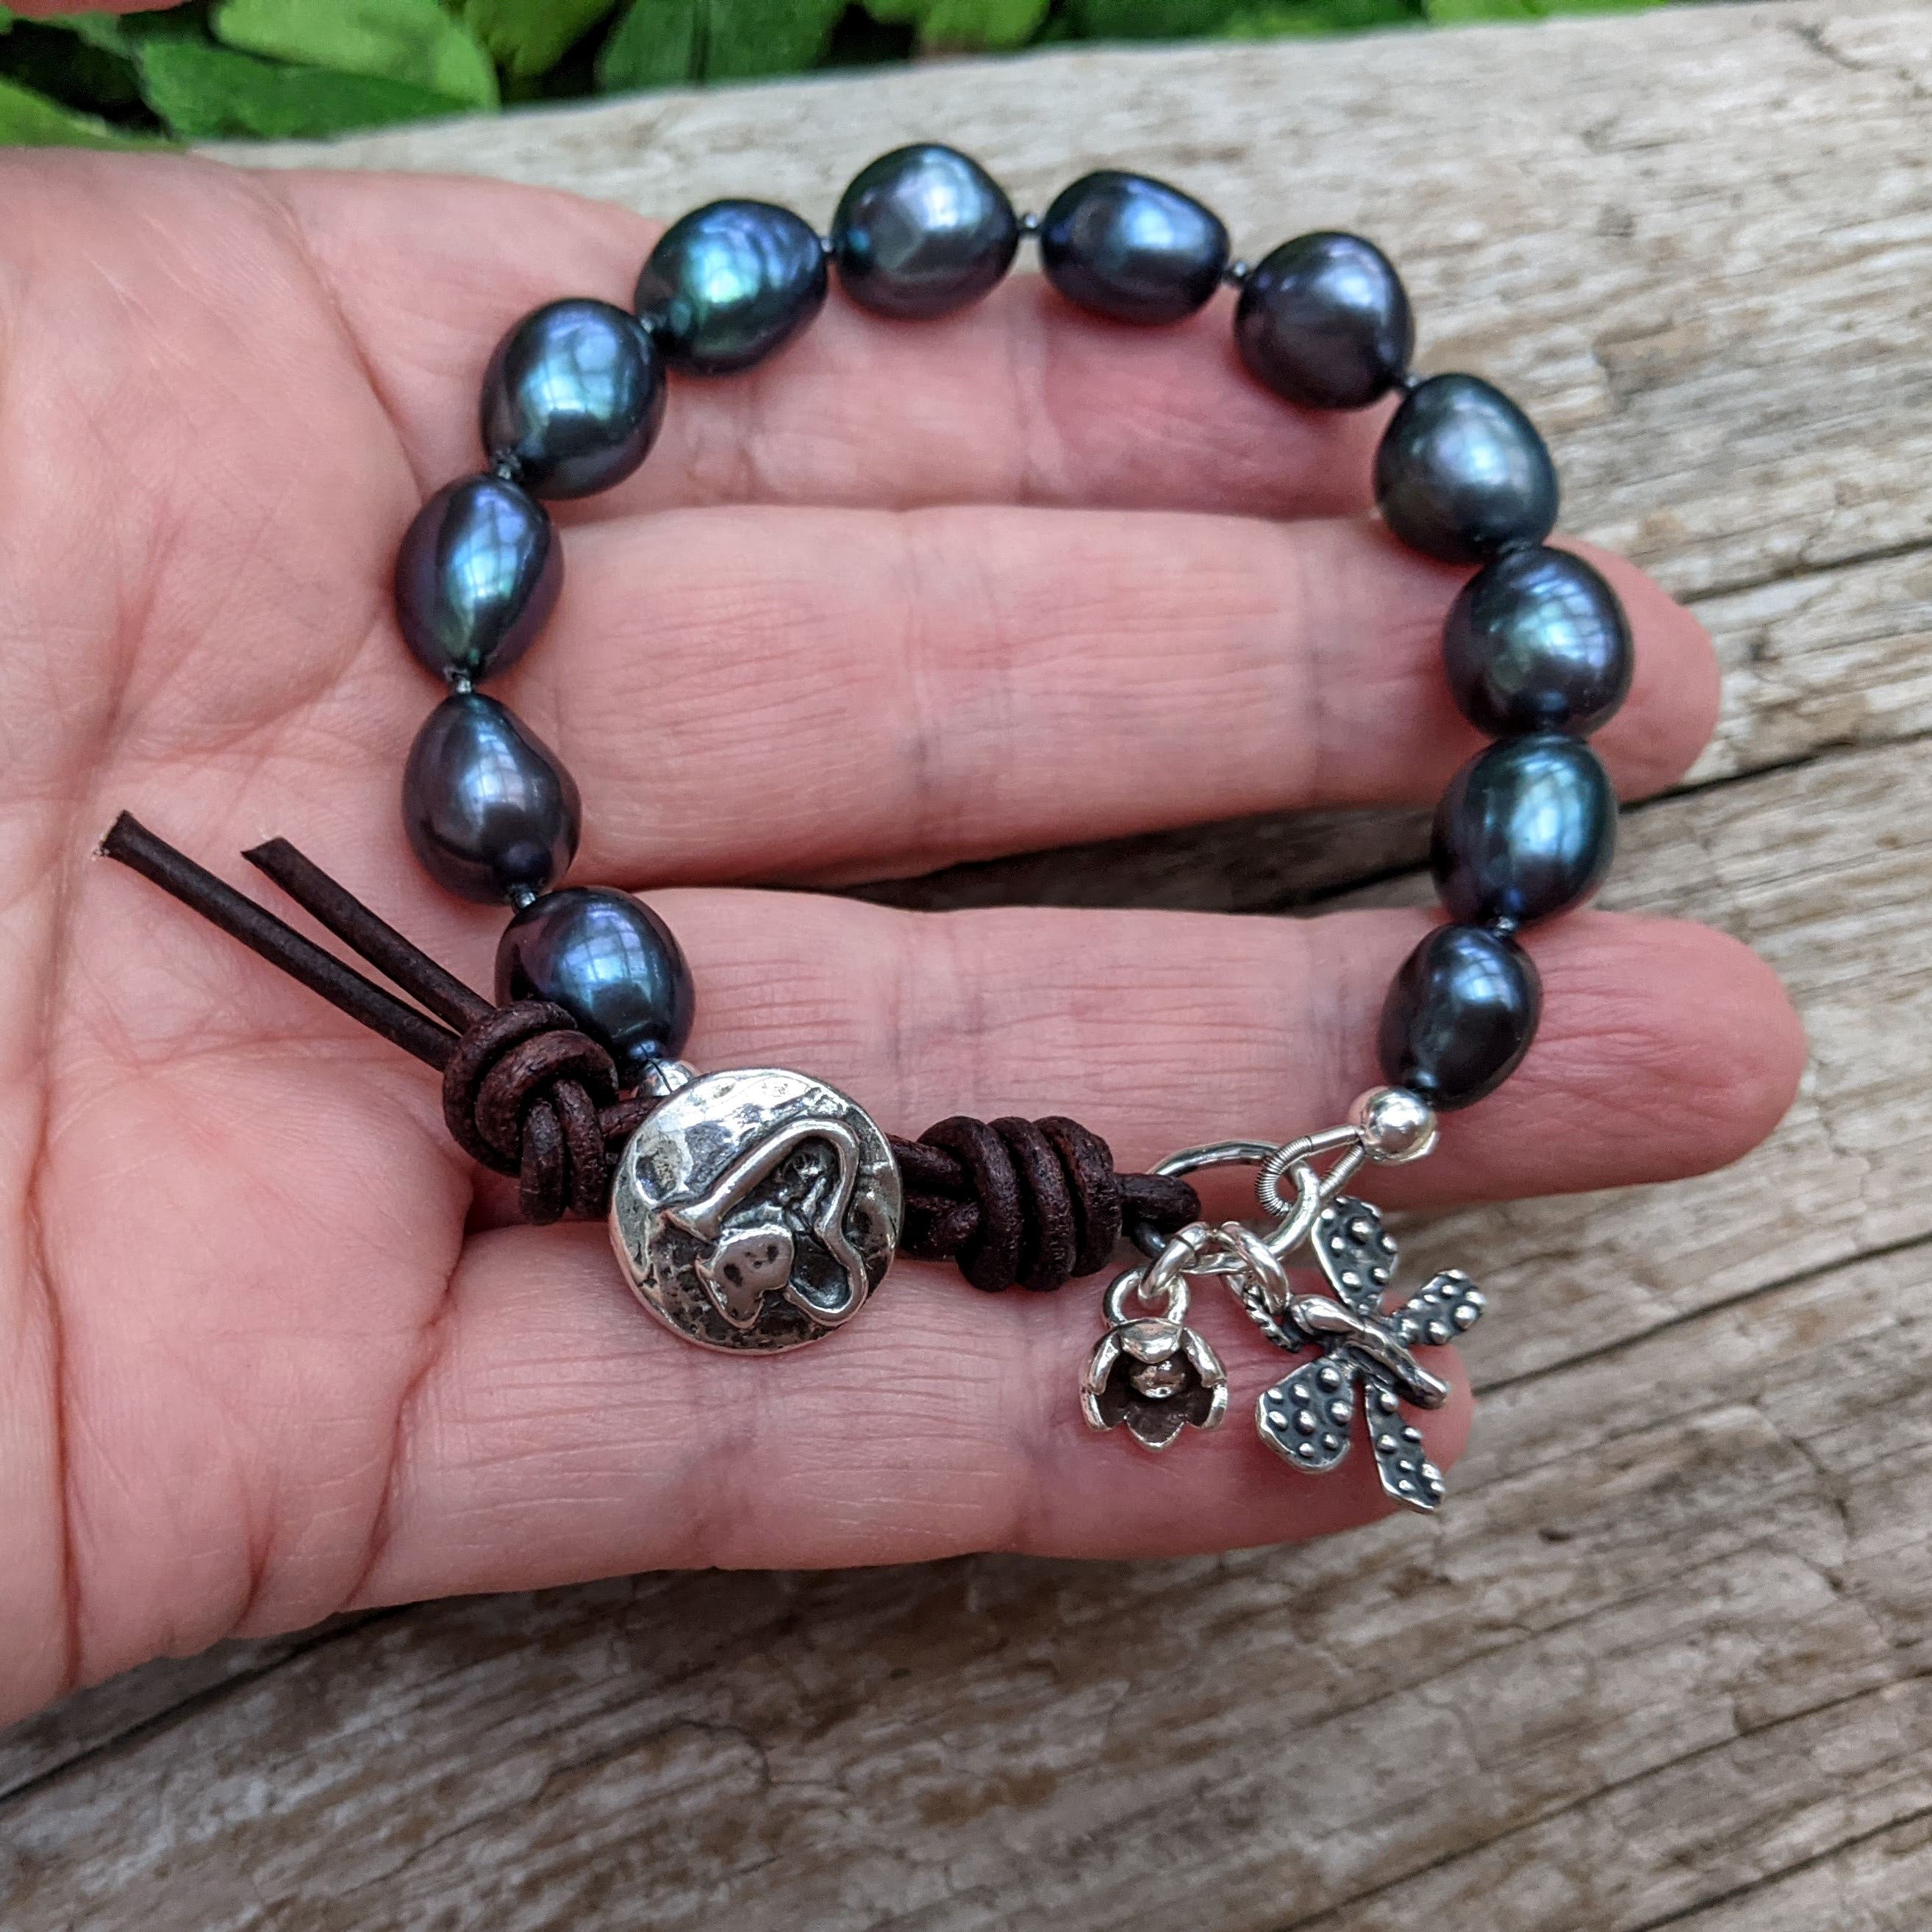 Black pearl bracelet. Charm jewelry. Butterfly bracelet. Hearts bracelet. Boho jewelry, bohemian bracelet. Handcrafted by Aurora Creative Jewellery.